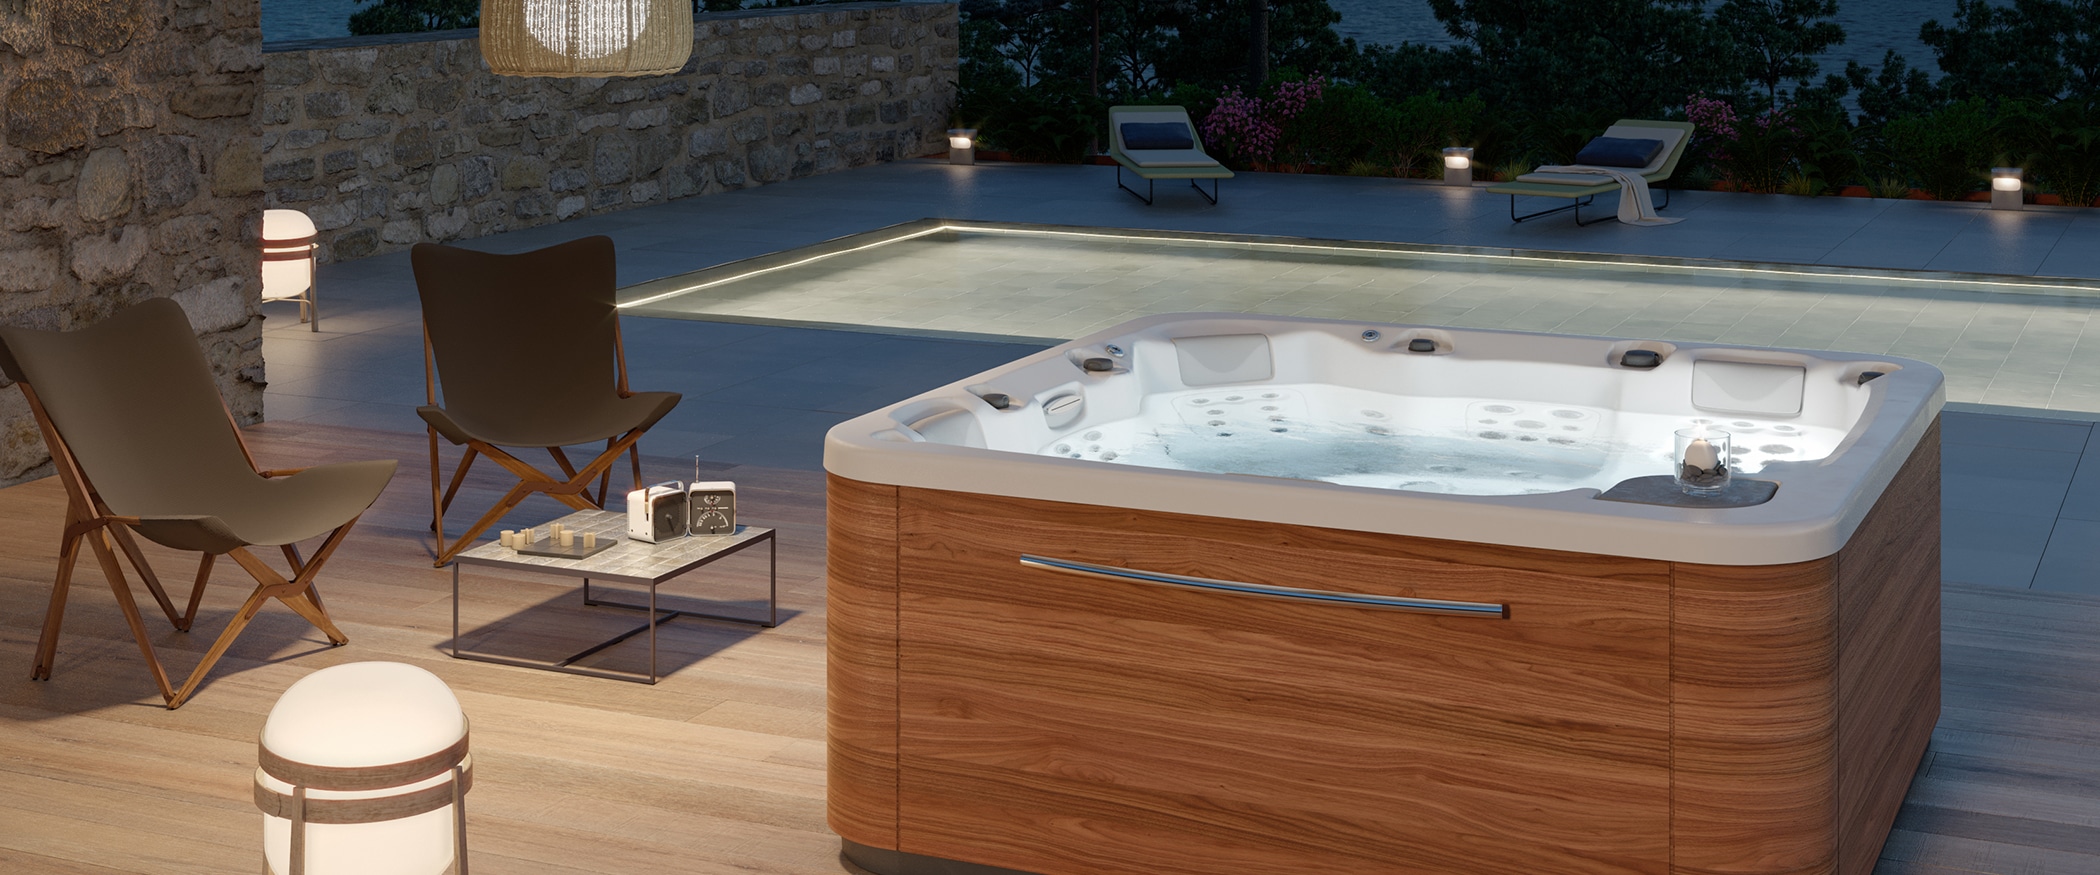 Essence Hot Tub 5 Person Jacuzzi For Indoor And Outdoor Aquavia Spa